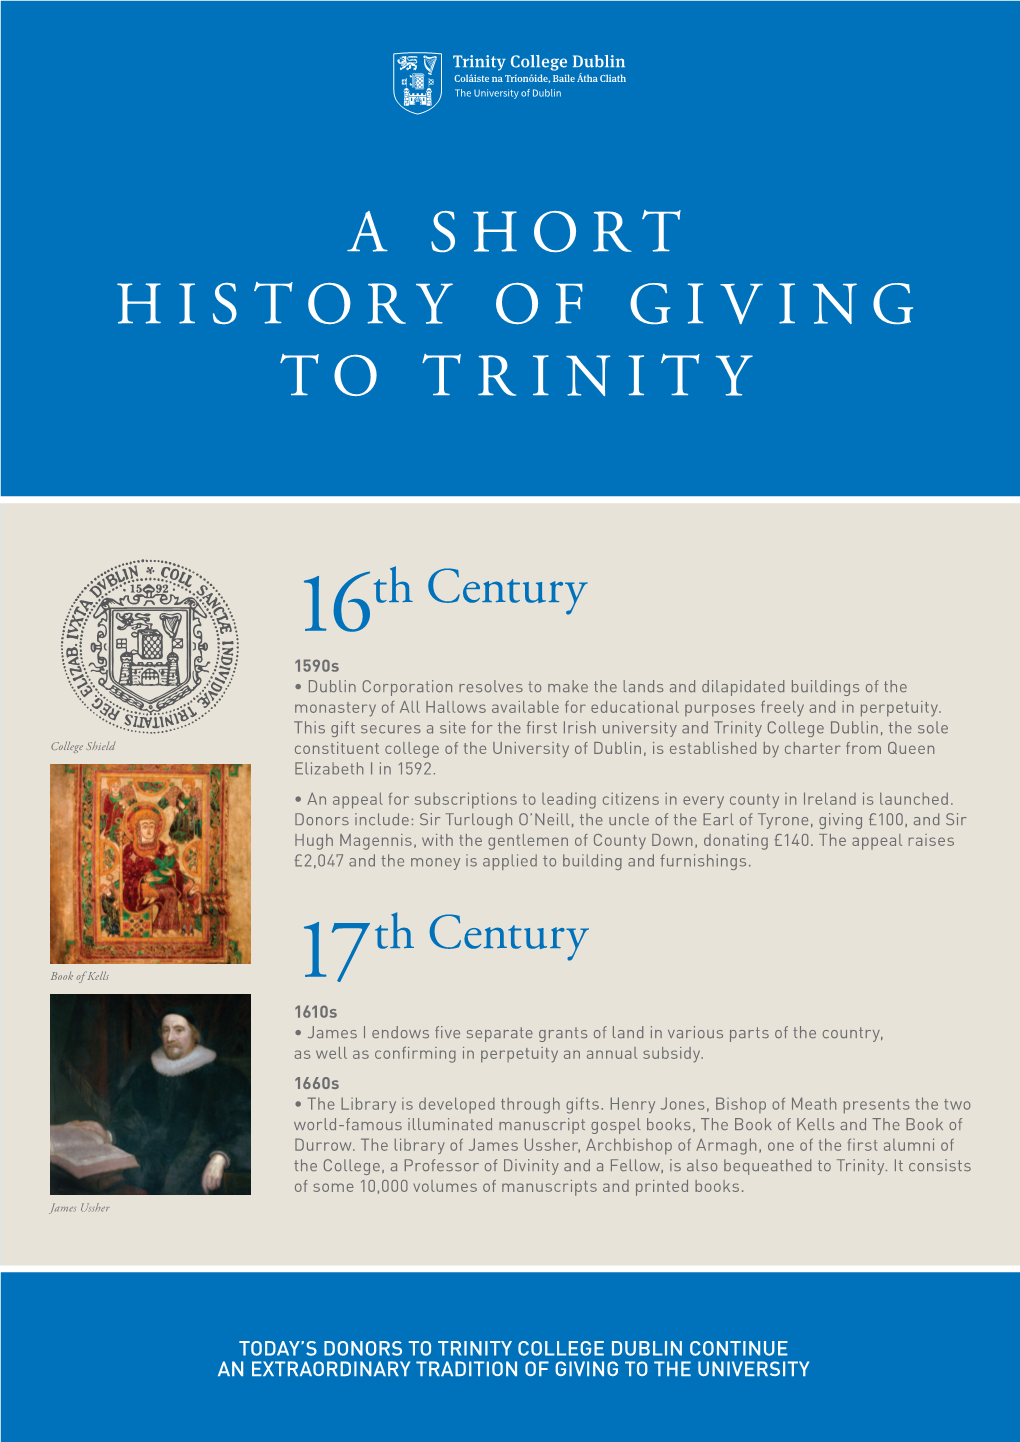 A Short History of Giving to Trinity